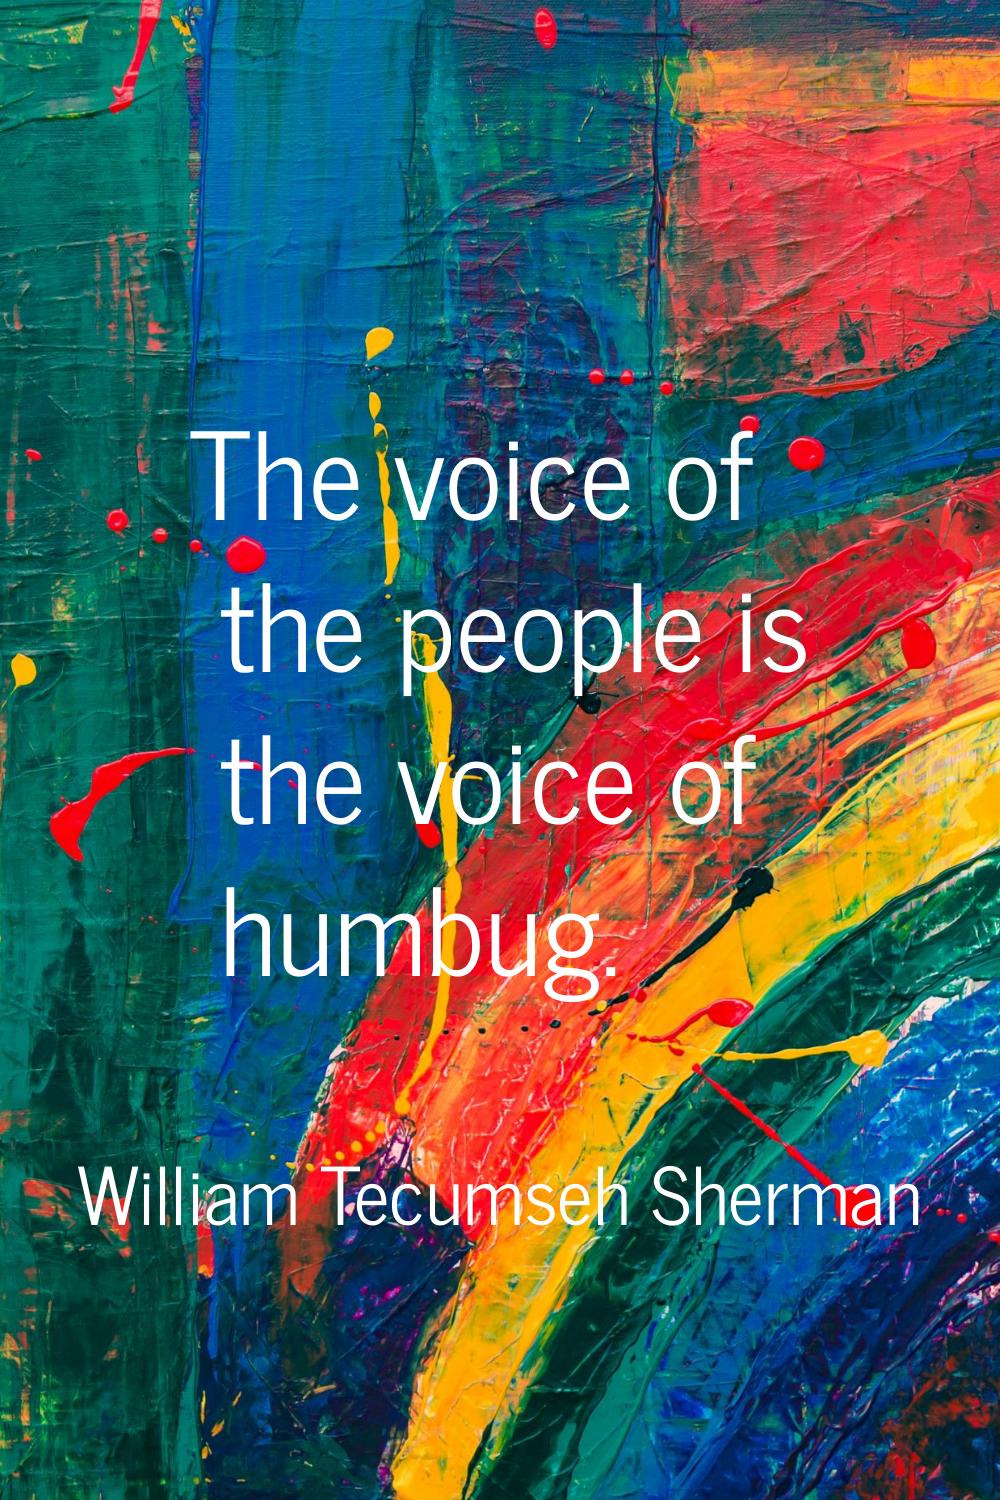 The voice of the people is the voice of humbug.